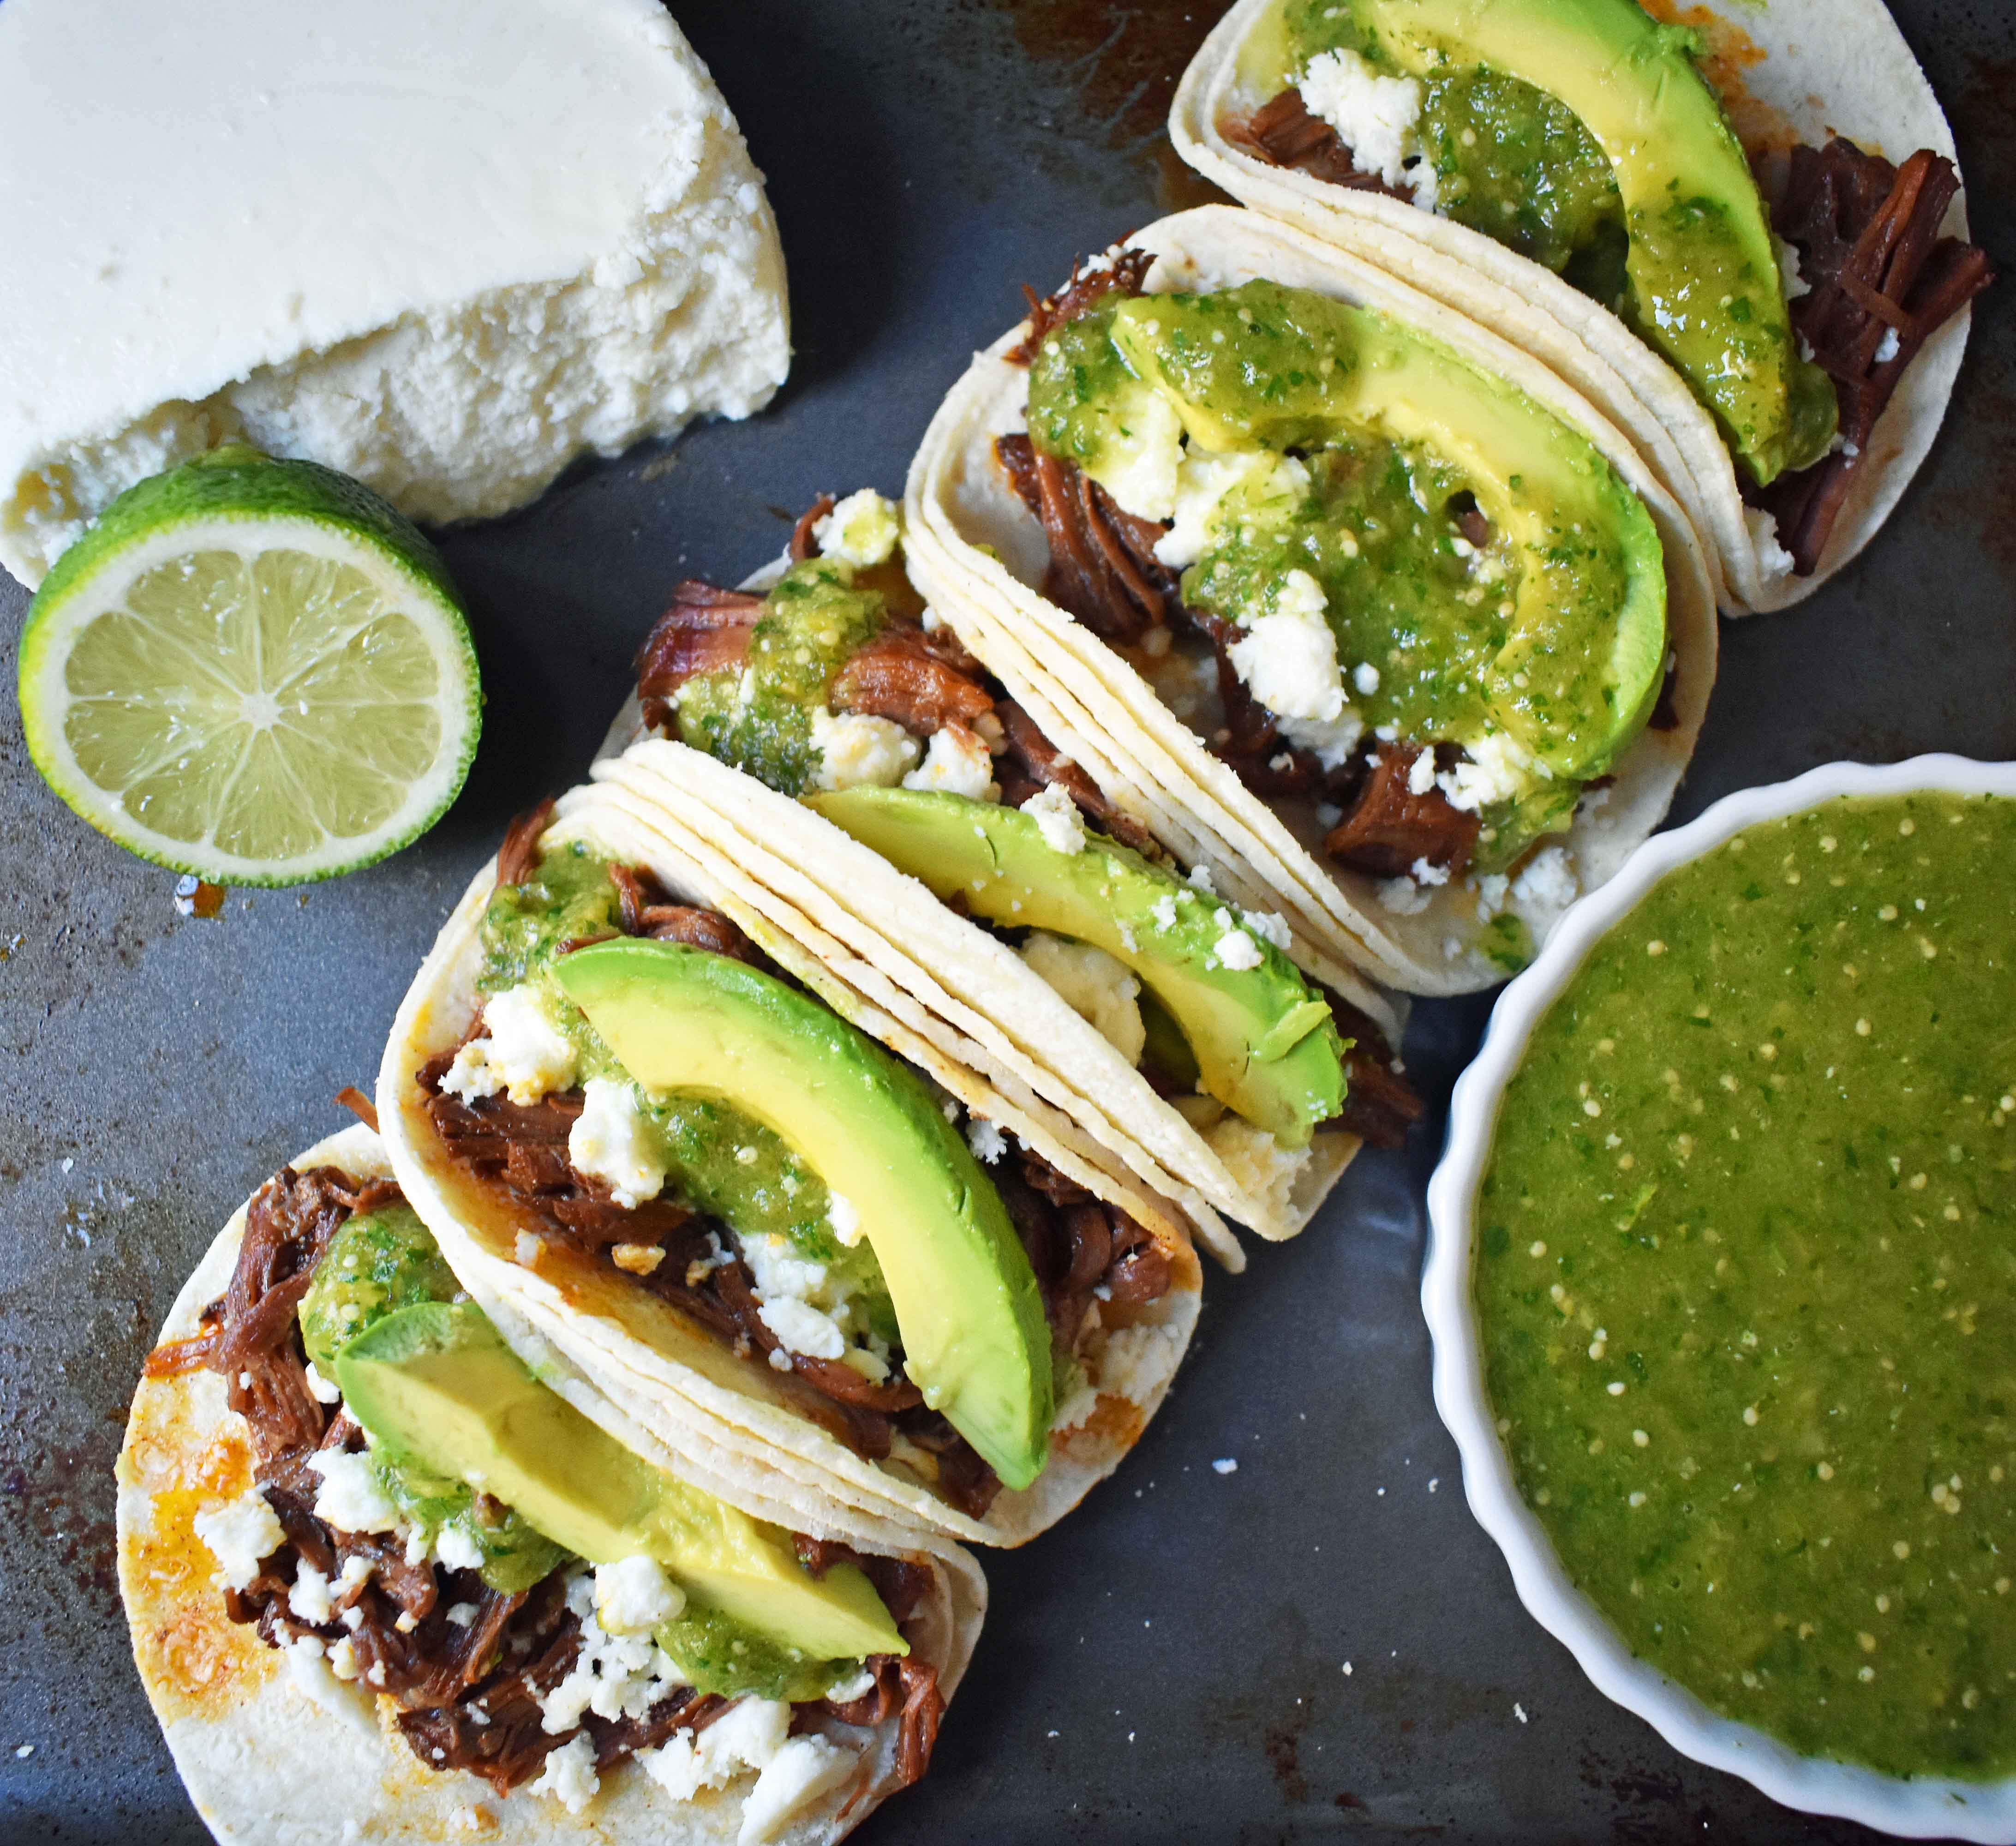 Slow Cooker Beef Barbacoa Tacos with Homemade Tomatillo Salsa. Tender spicy beef barbacoa made in slow cooker and topped with fresh avocado, queso fresco cheese, and homemade tomatillo salsa. www.modernhoney.com